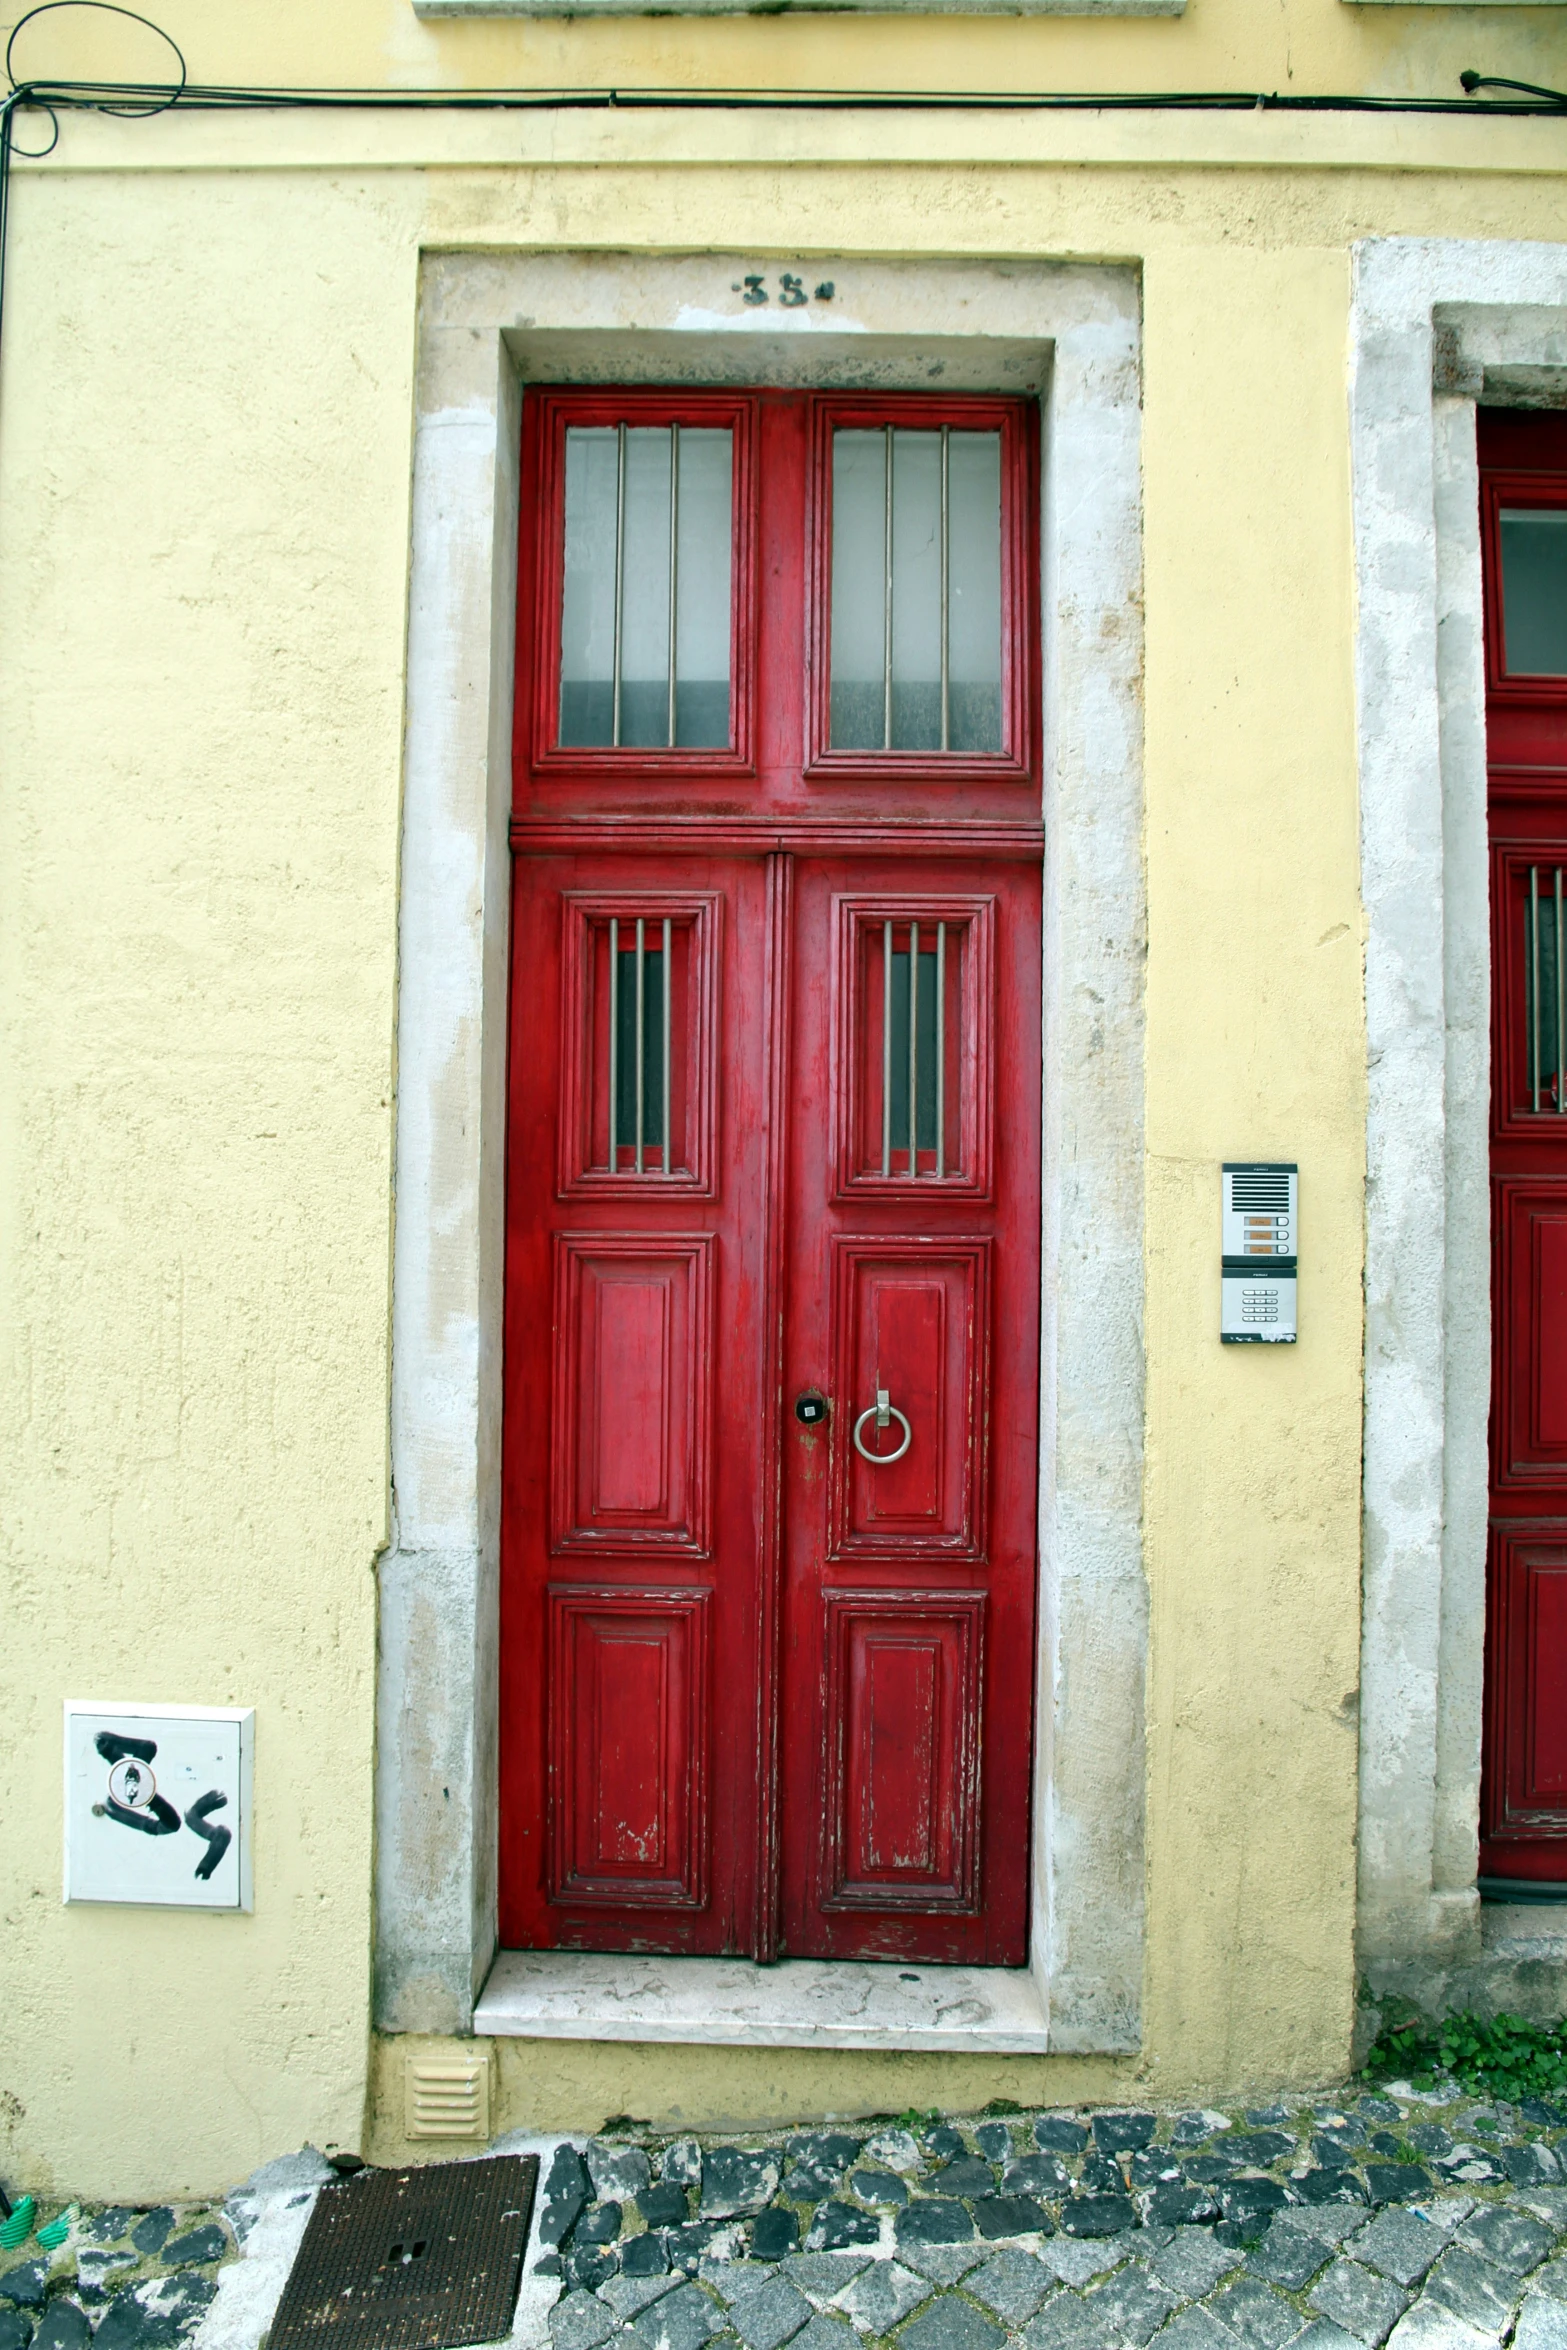 a red door on a tan building with a clock above